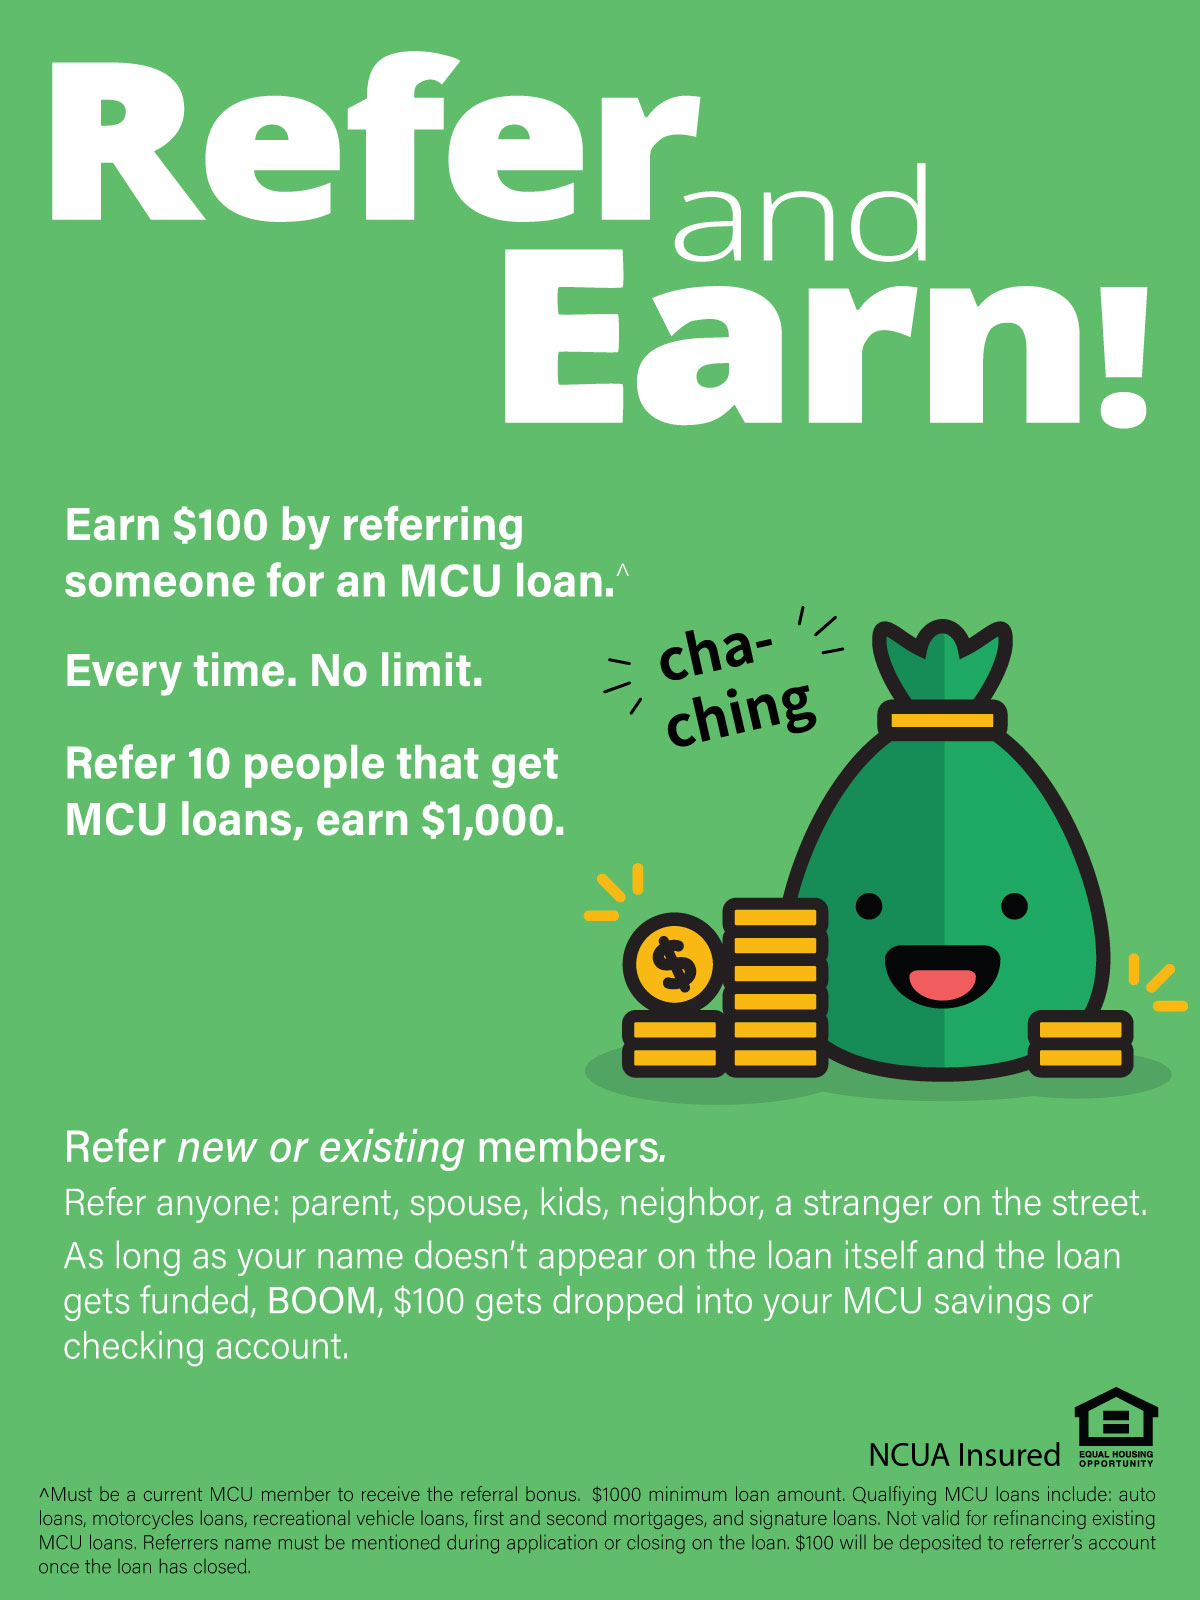 Refer and Earn Loan promo